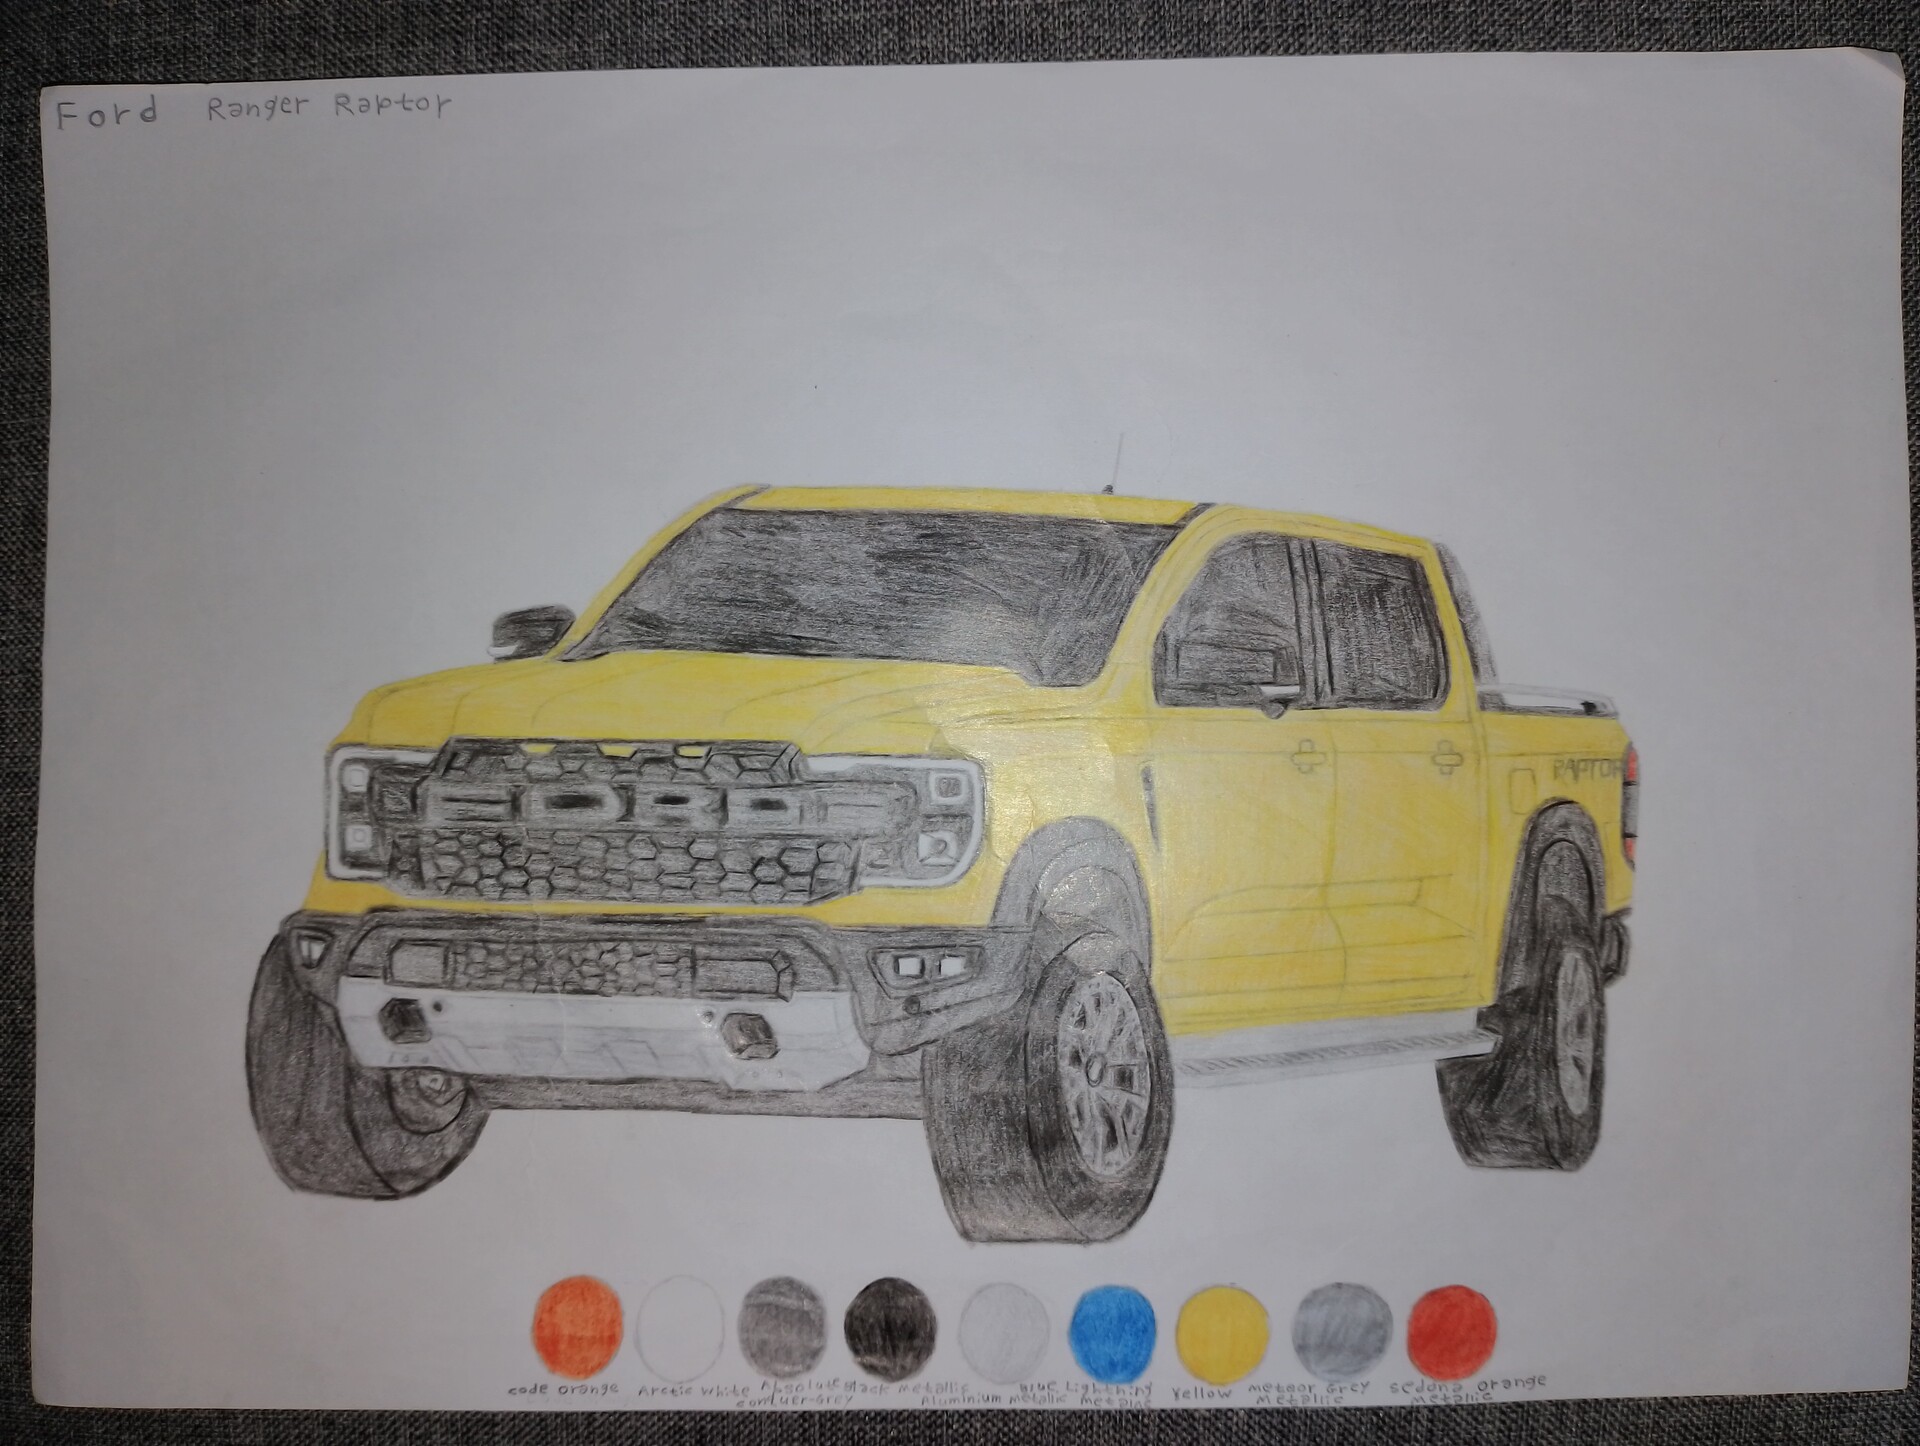 how to draw a ford truck